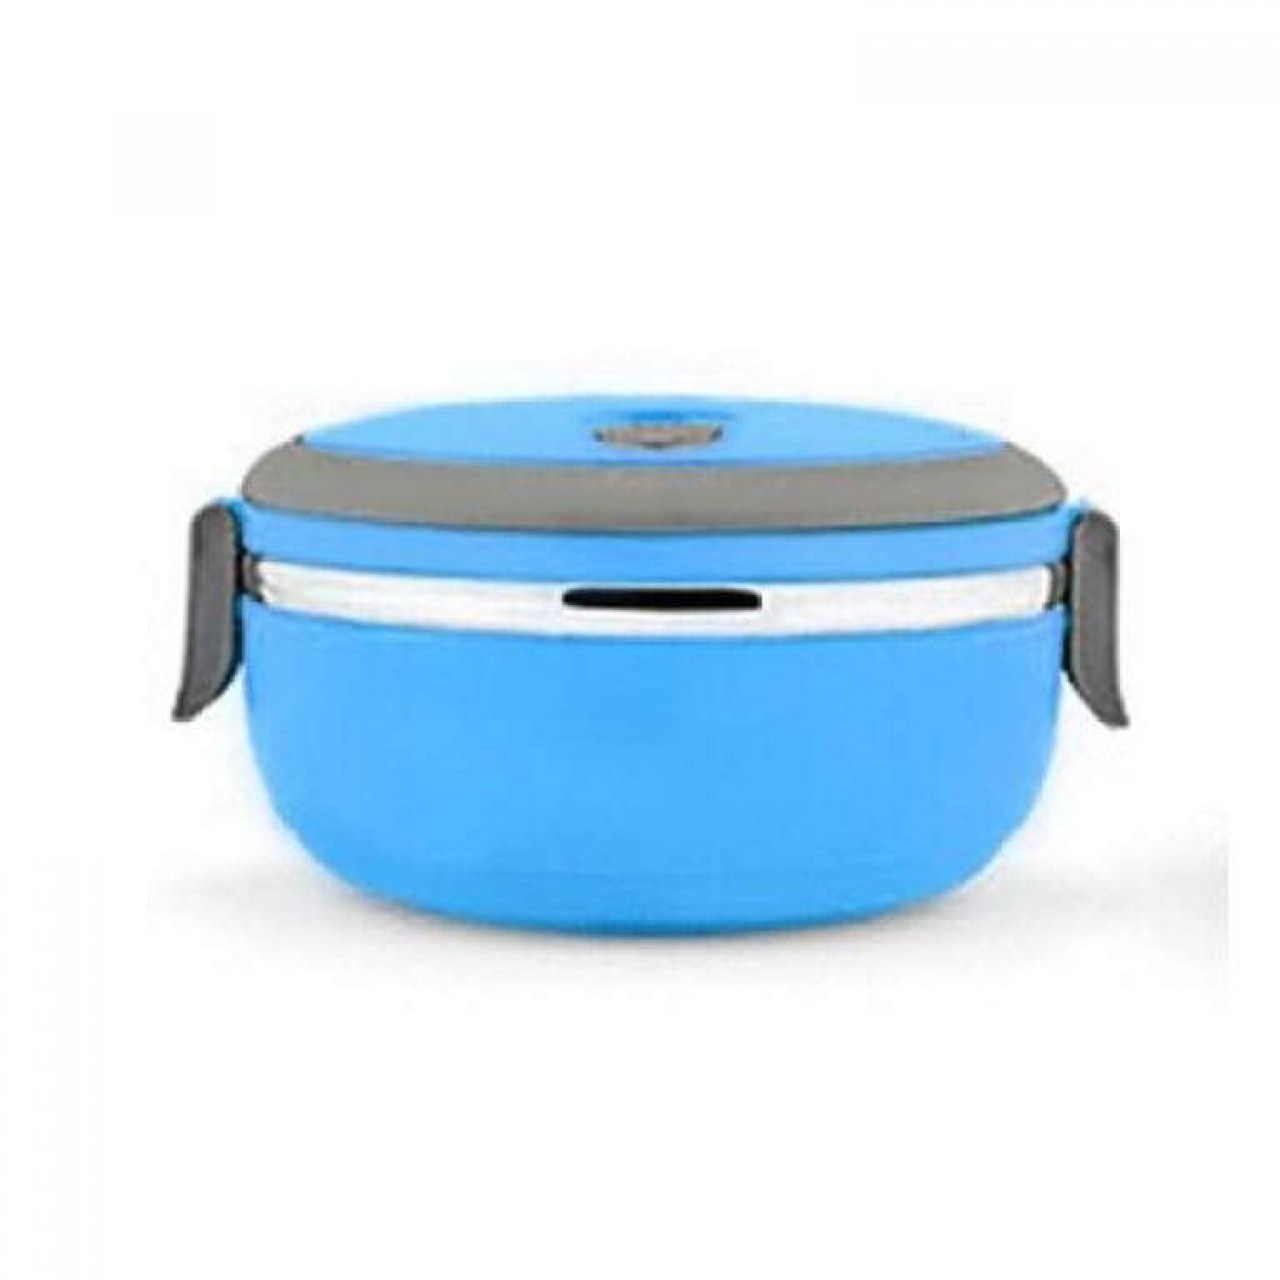 Stainless Steel Lunch Box - Blue